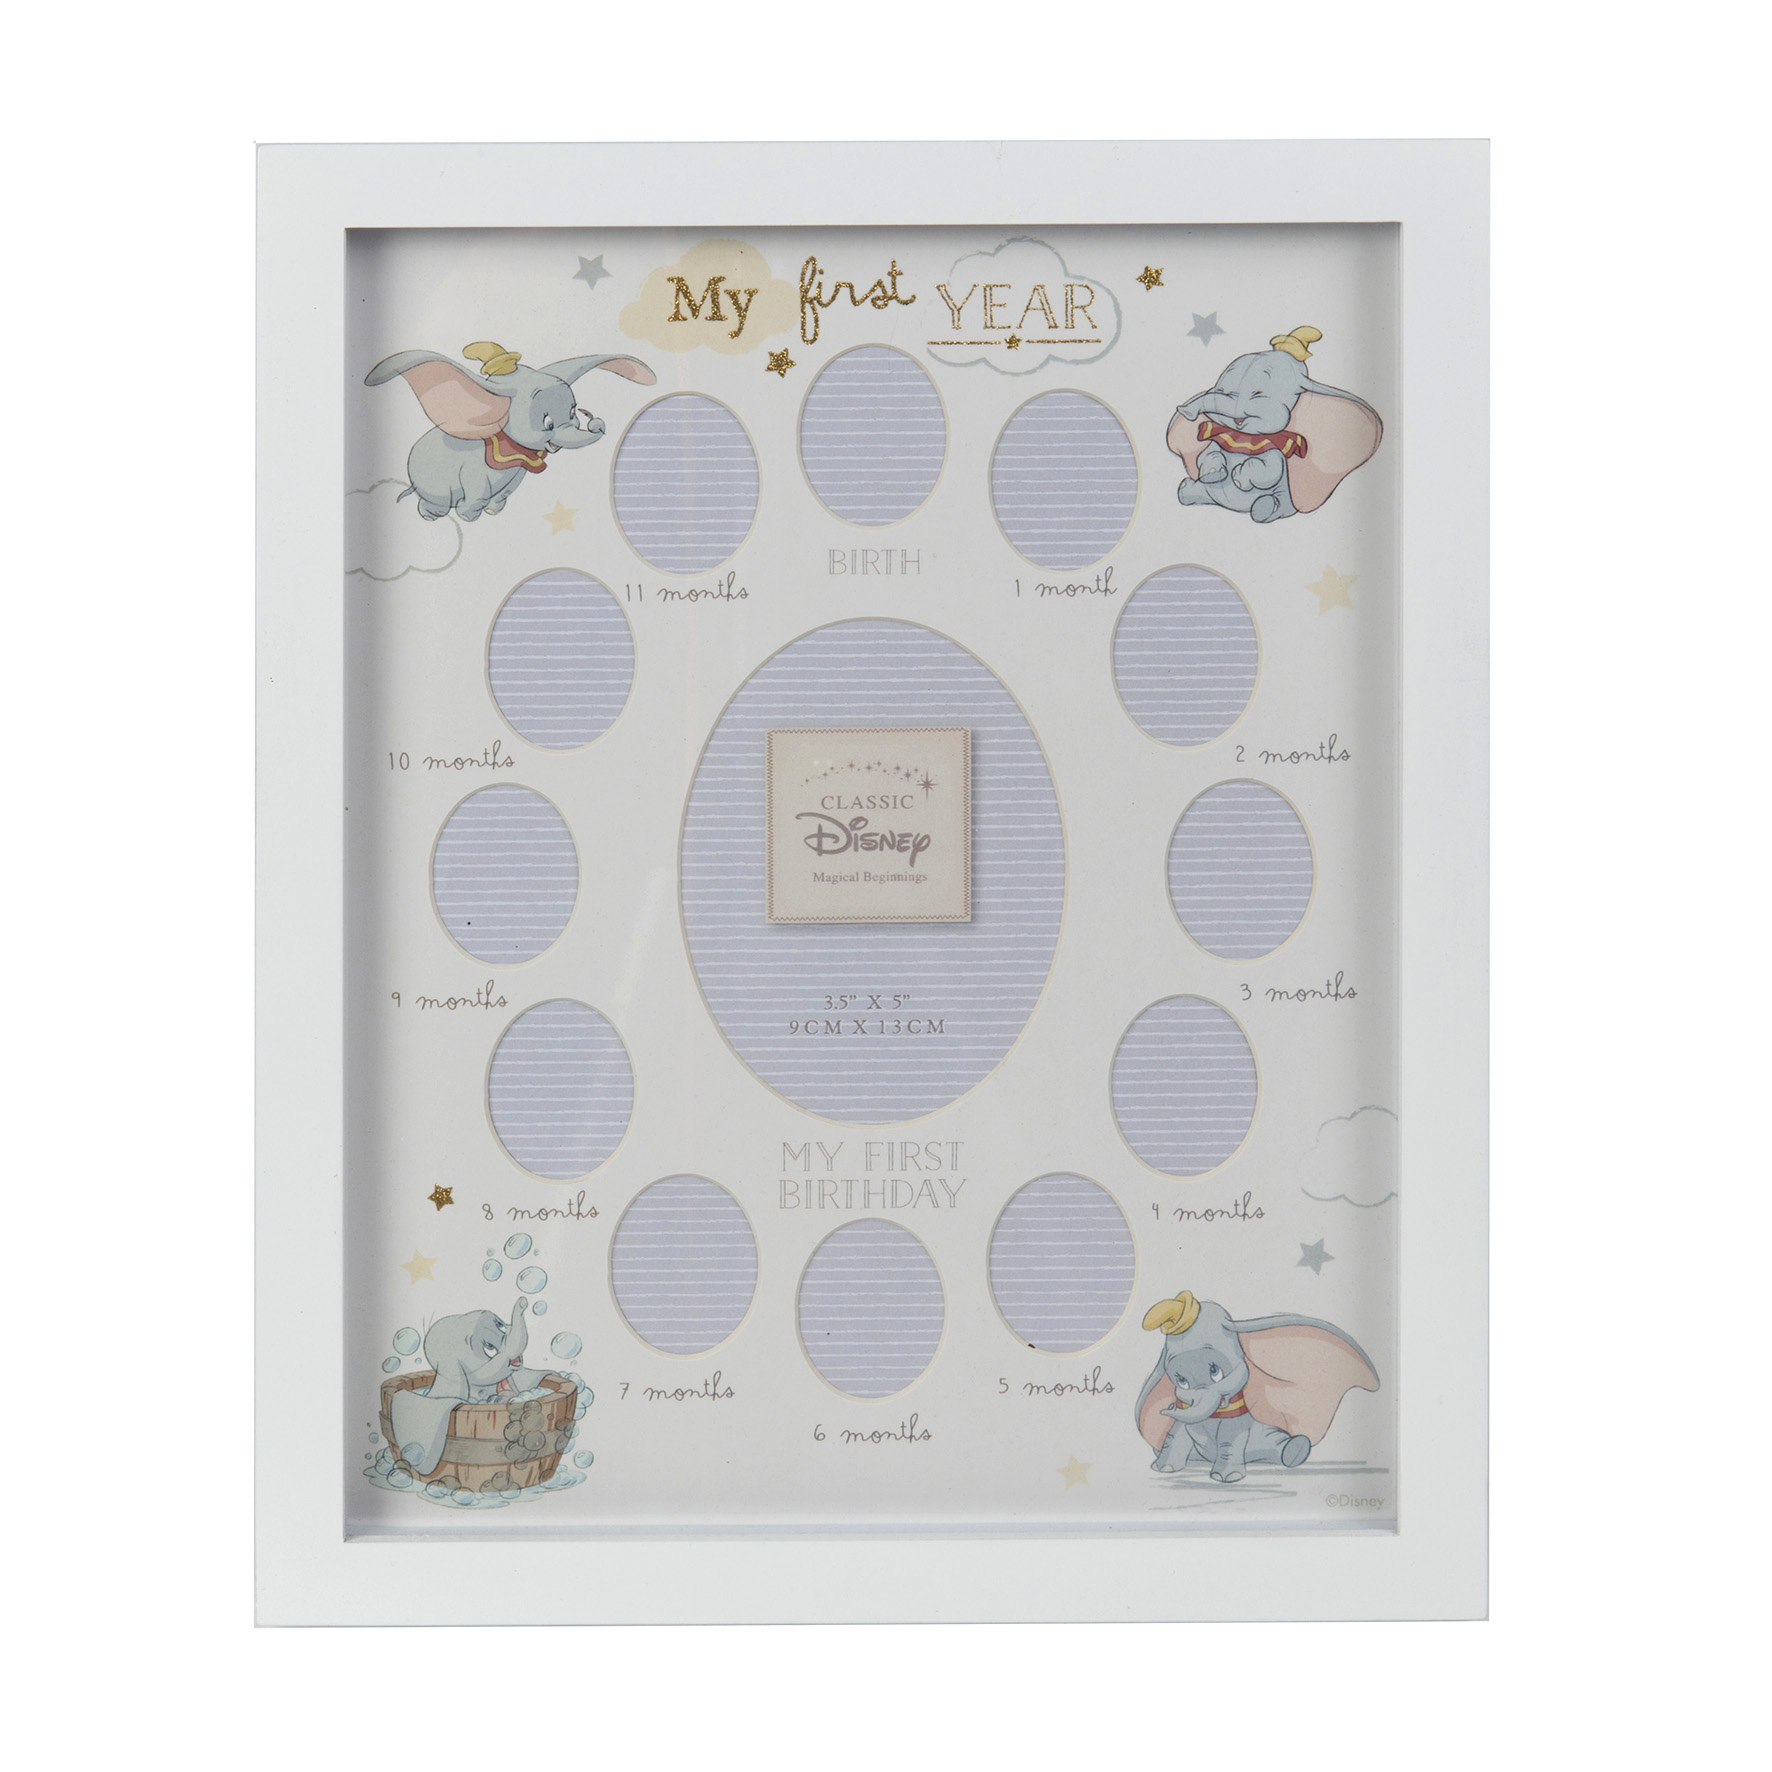 Disney Classic My First Year Dumbo Themed Decorative Baby Photo Frame